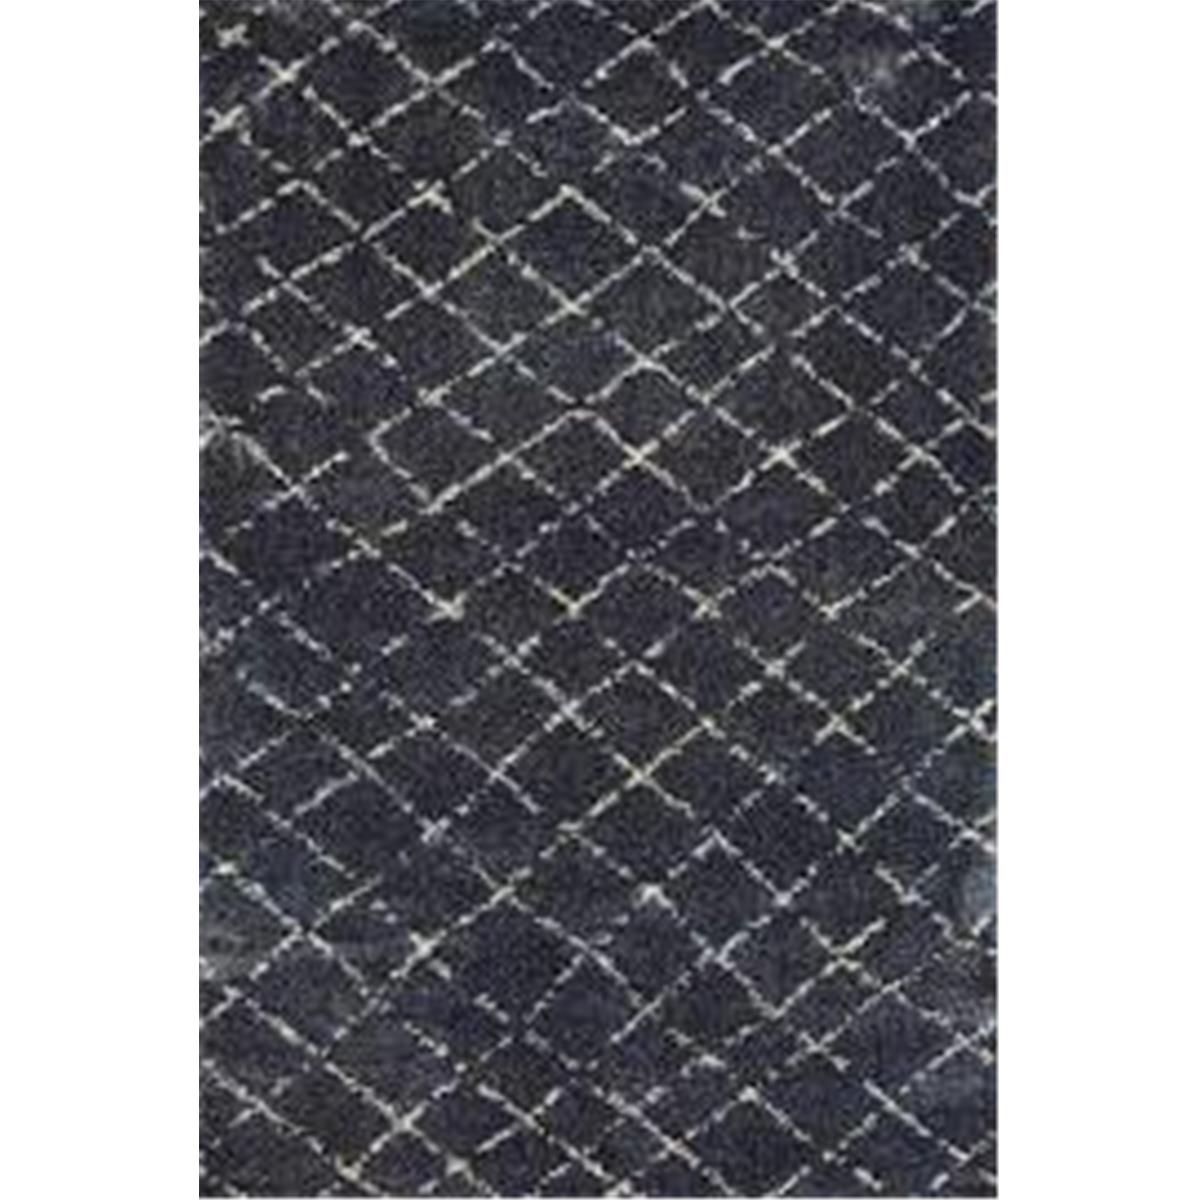 43317459053076t 5 Ft. 3 In. X 7 Ft. 6 In. Bromley Gio Rug, Navy & Grey